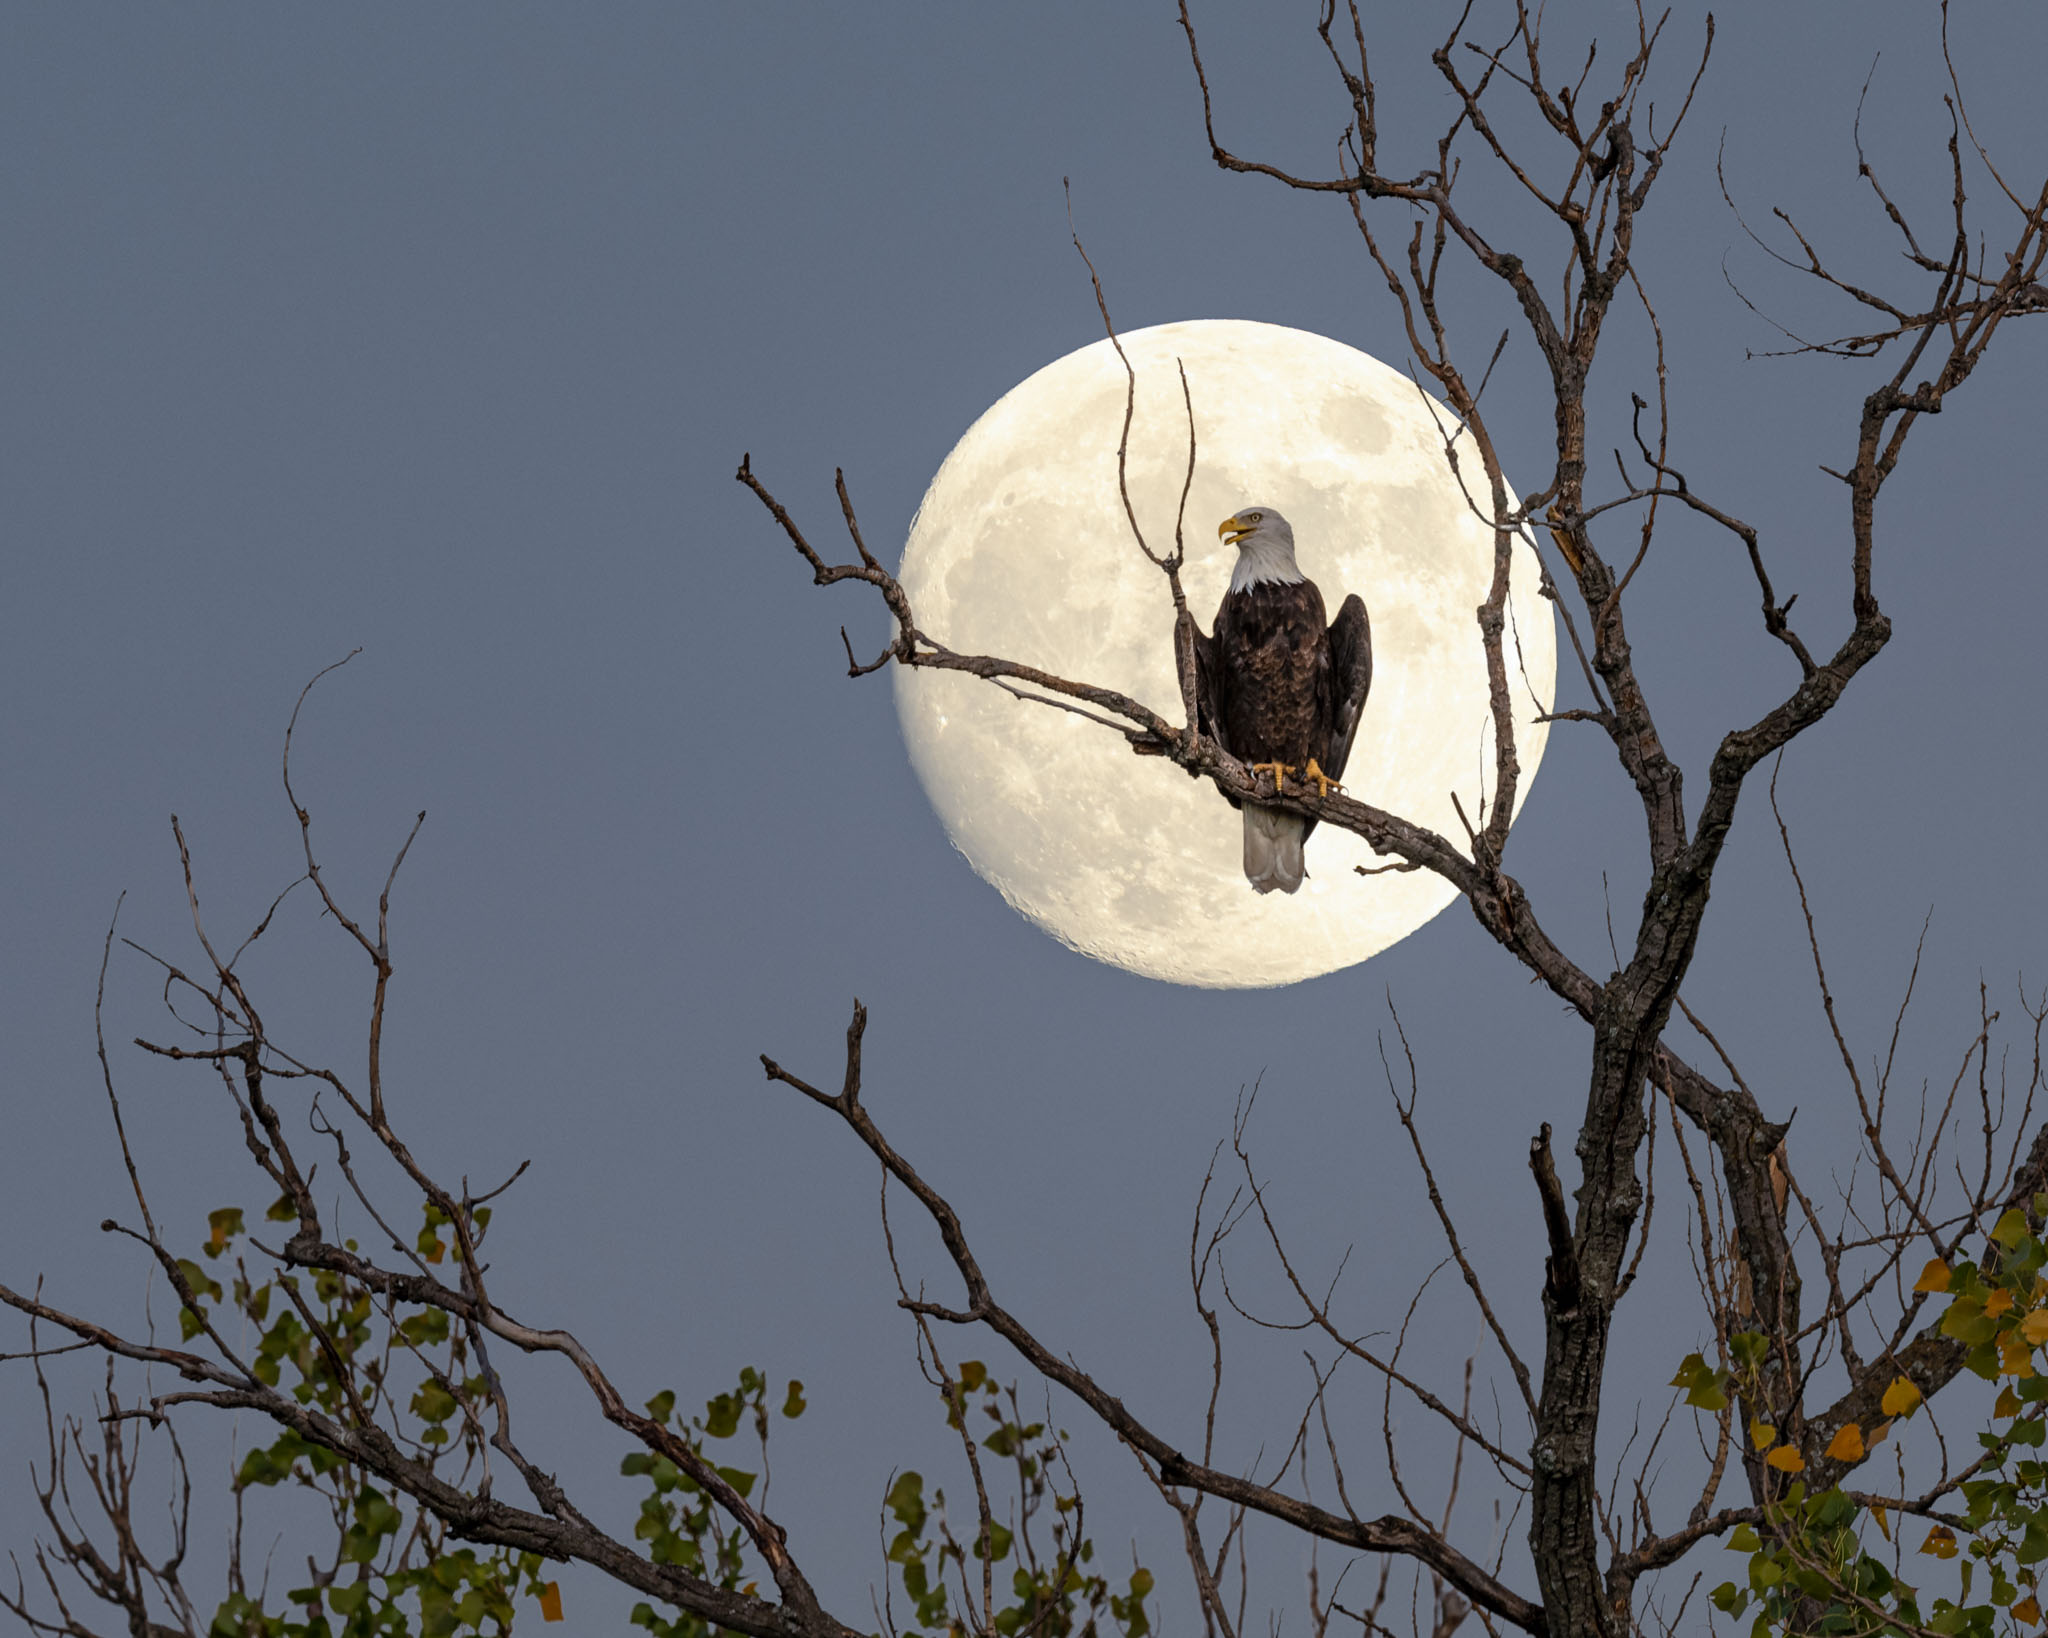 a bald eagle perched on a tree branch with the moon in the background